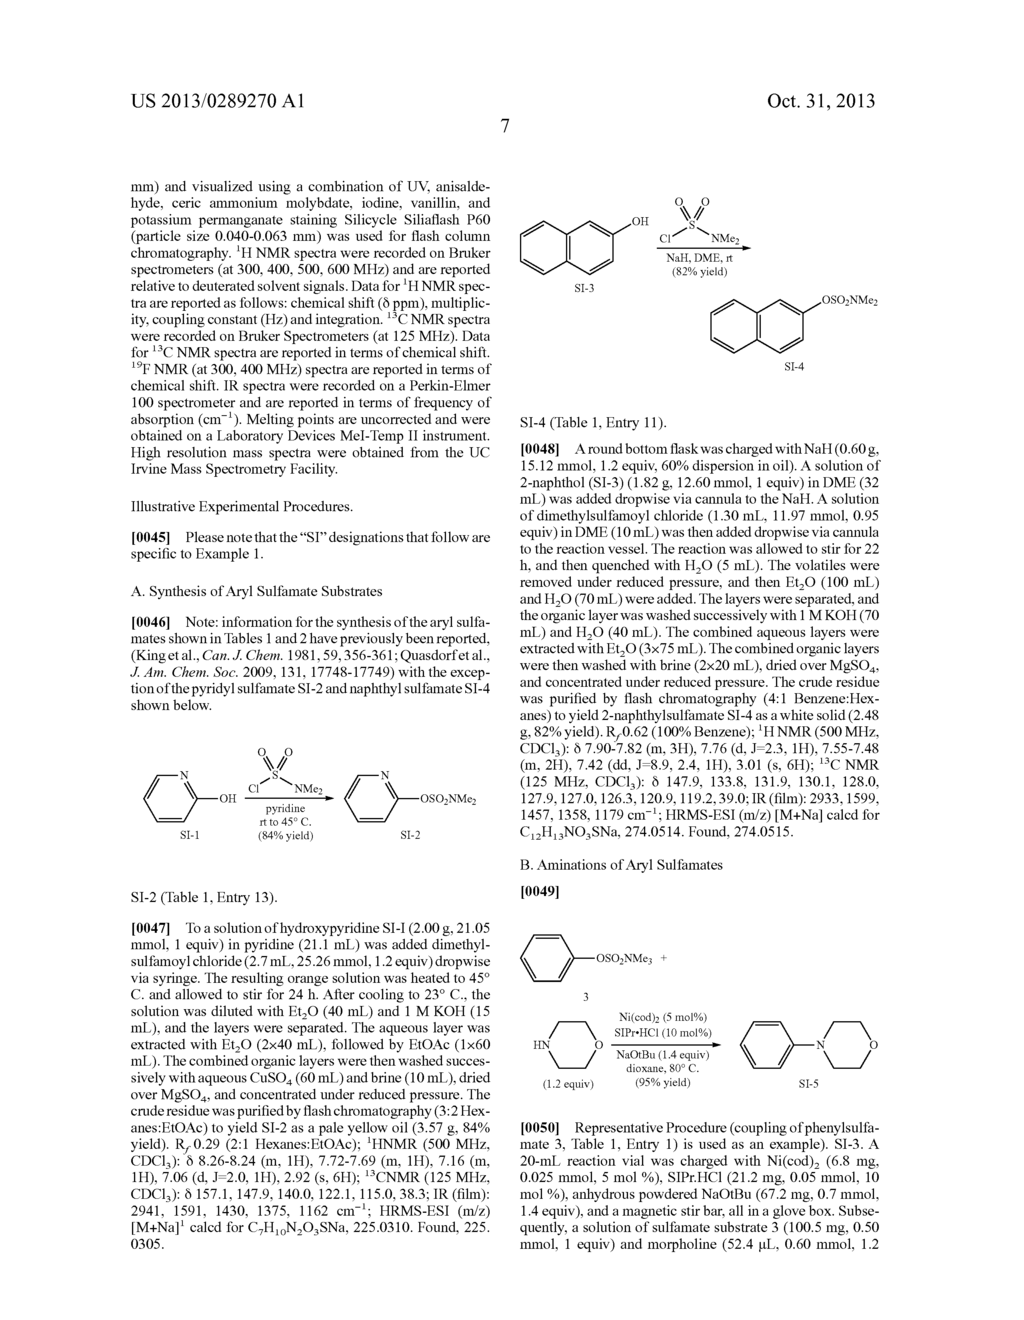 Amination of Aryl Alcohol Derivatives - diagram, schematic, and image 20